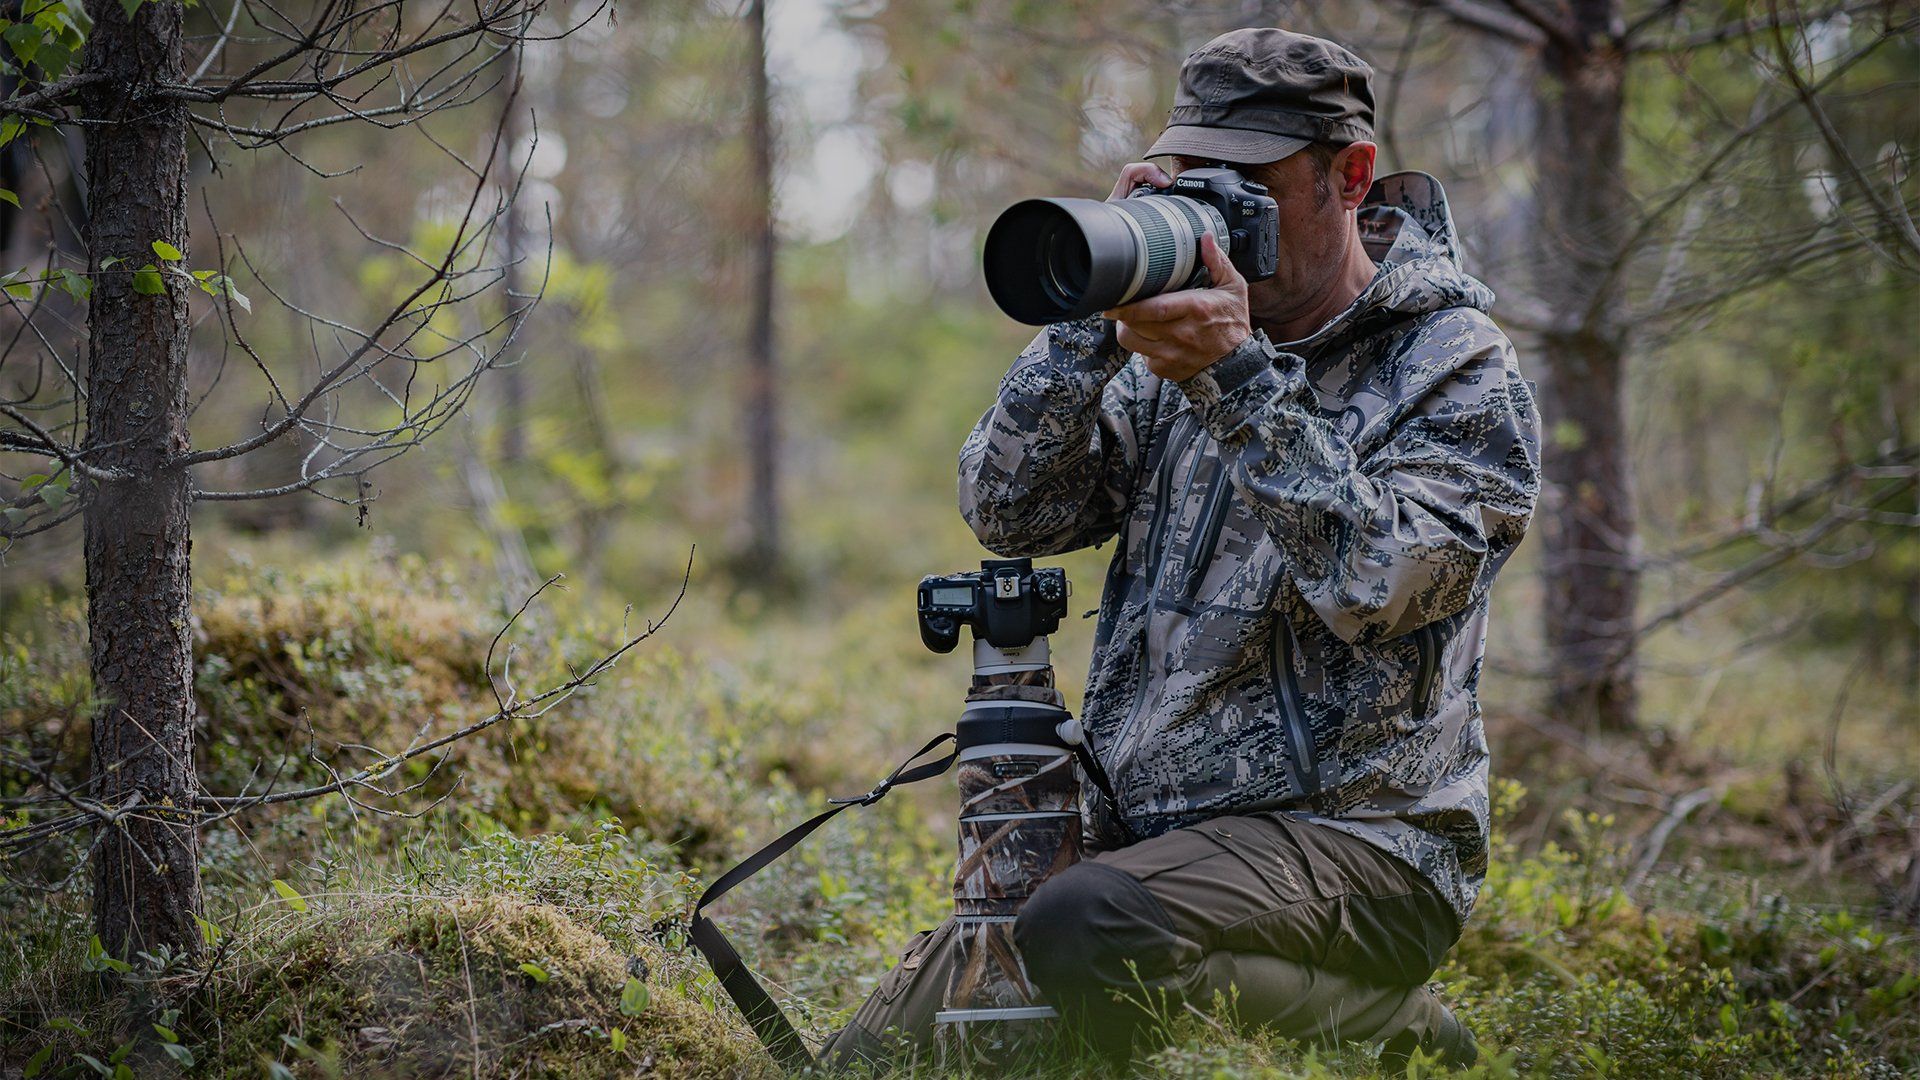 Markus Varesvuo uses the Canon EOS 90D in the woods.